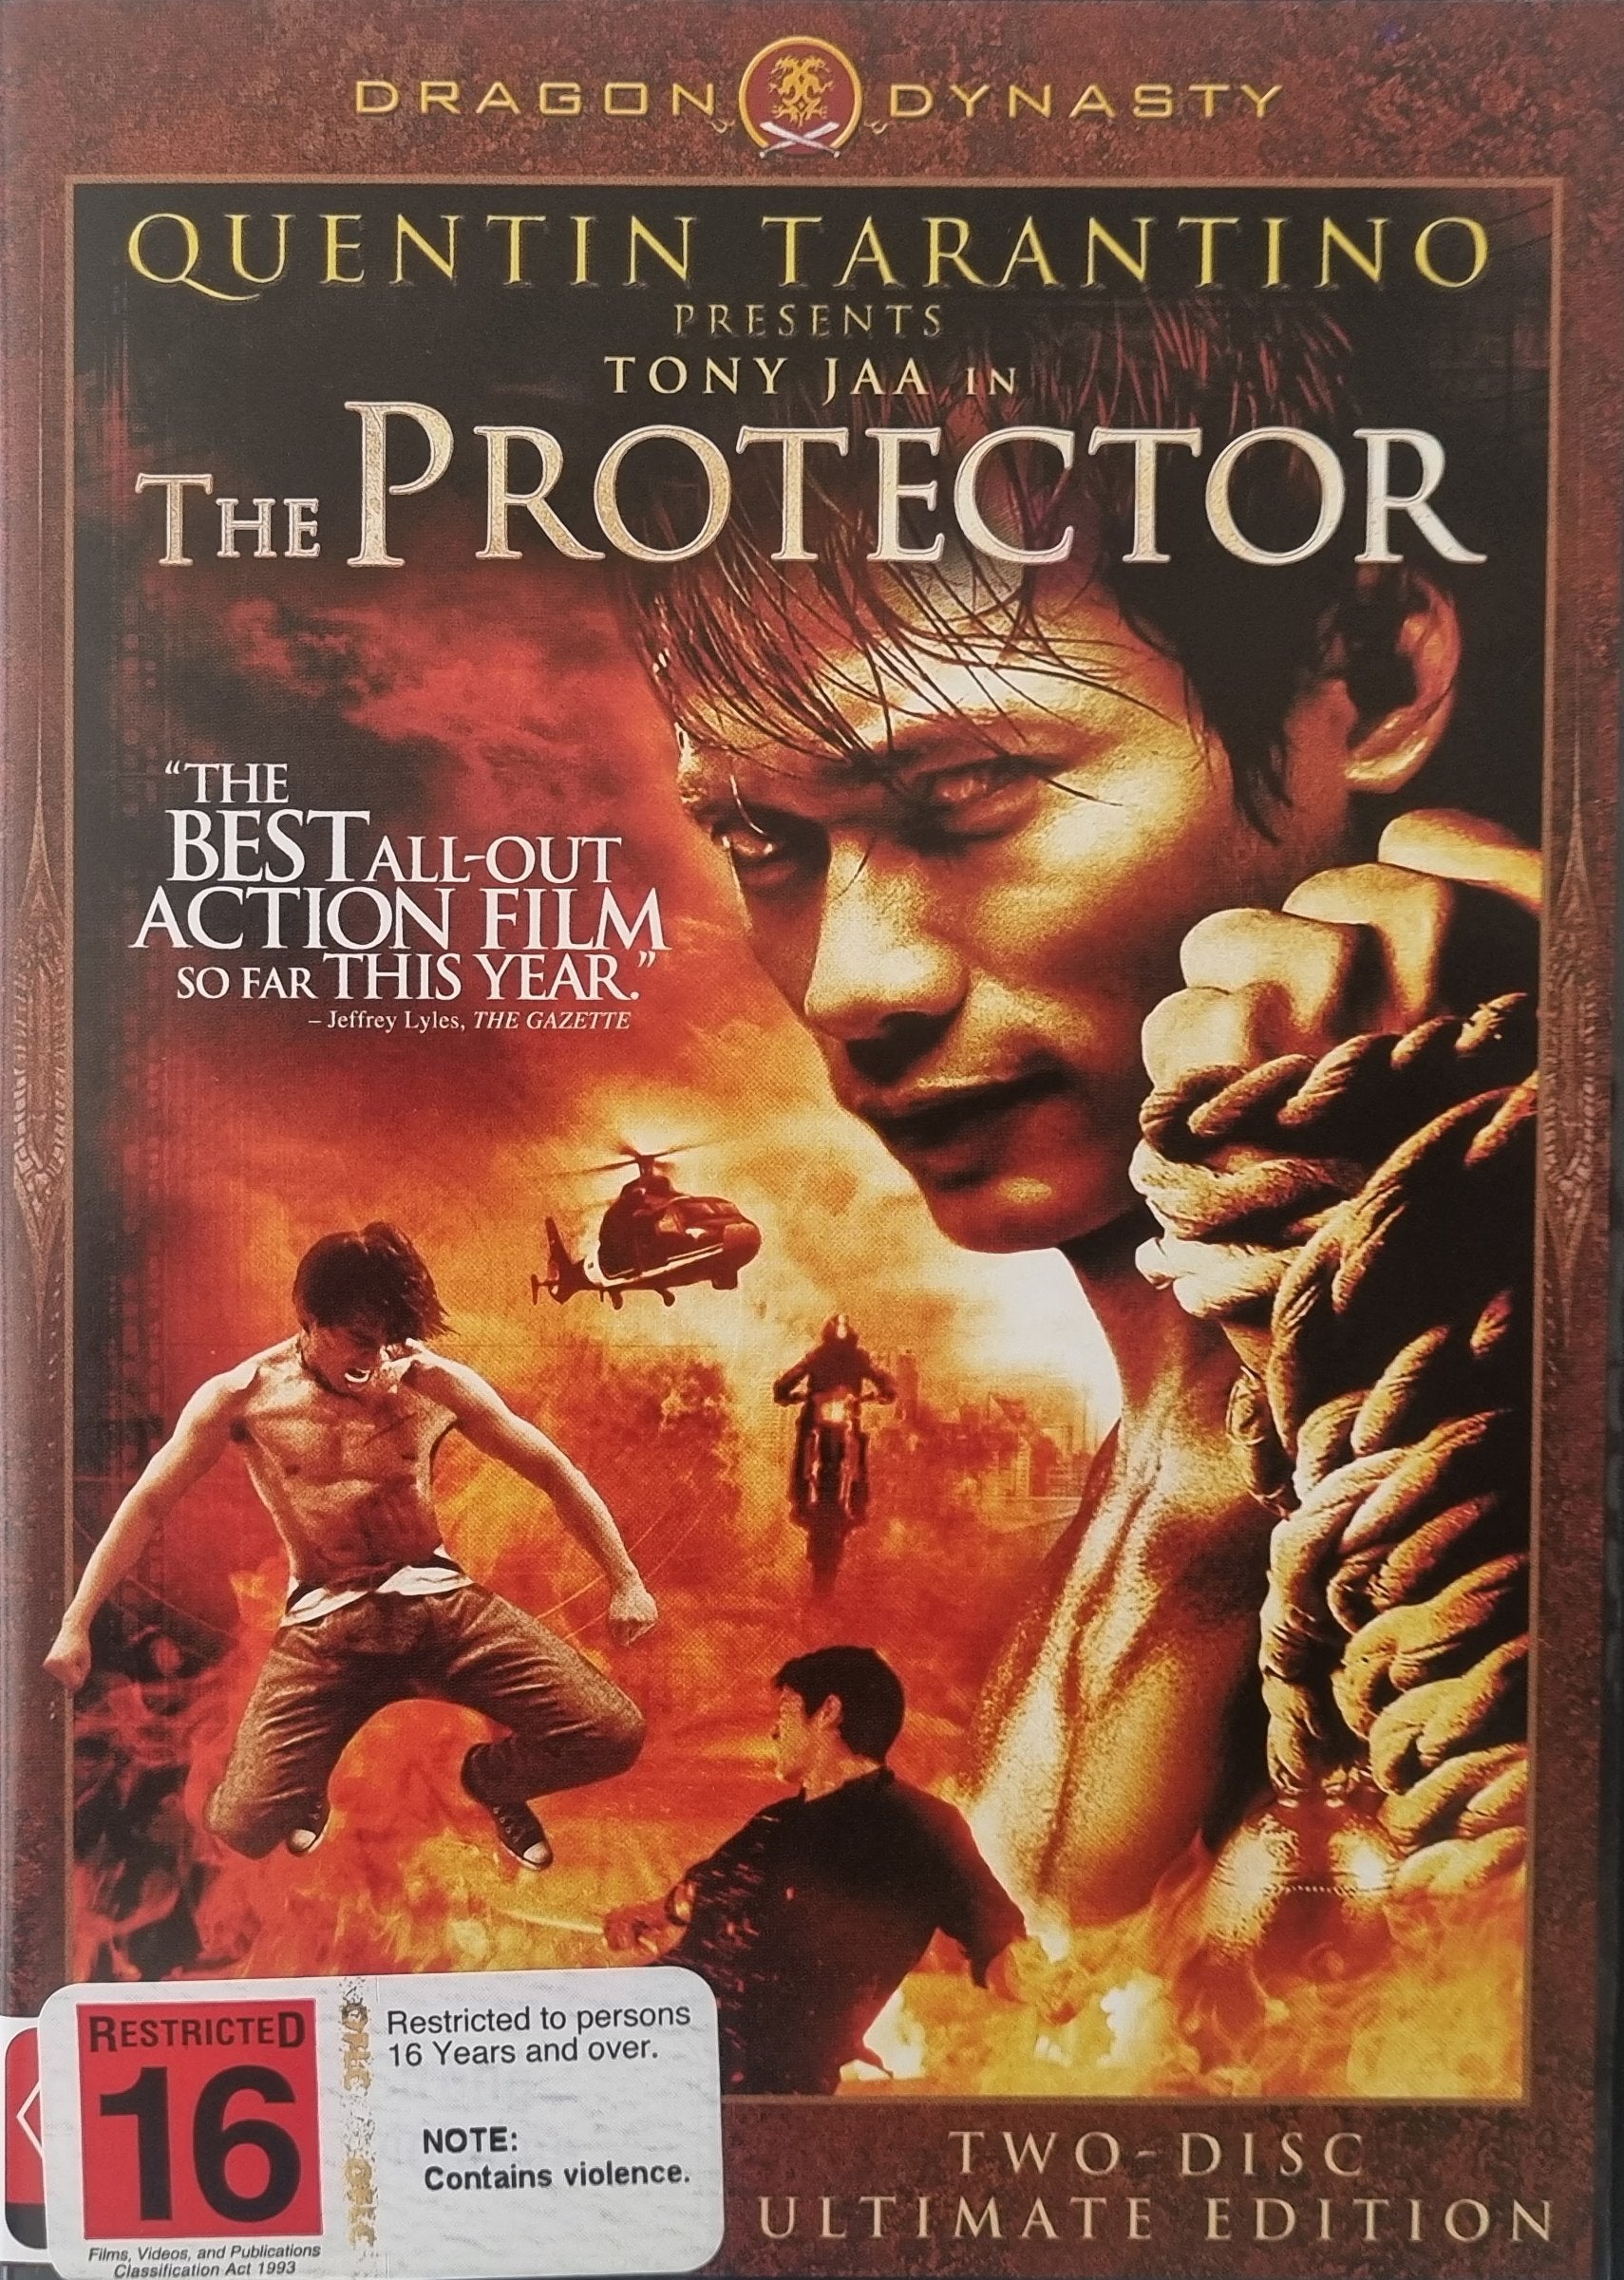 The Protector - Two Disc Ultimate Edition (DVD)